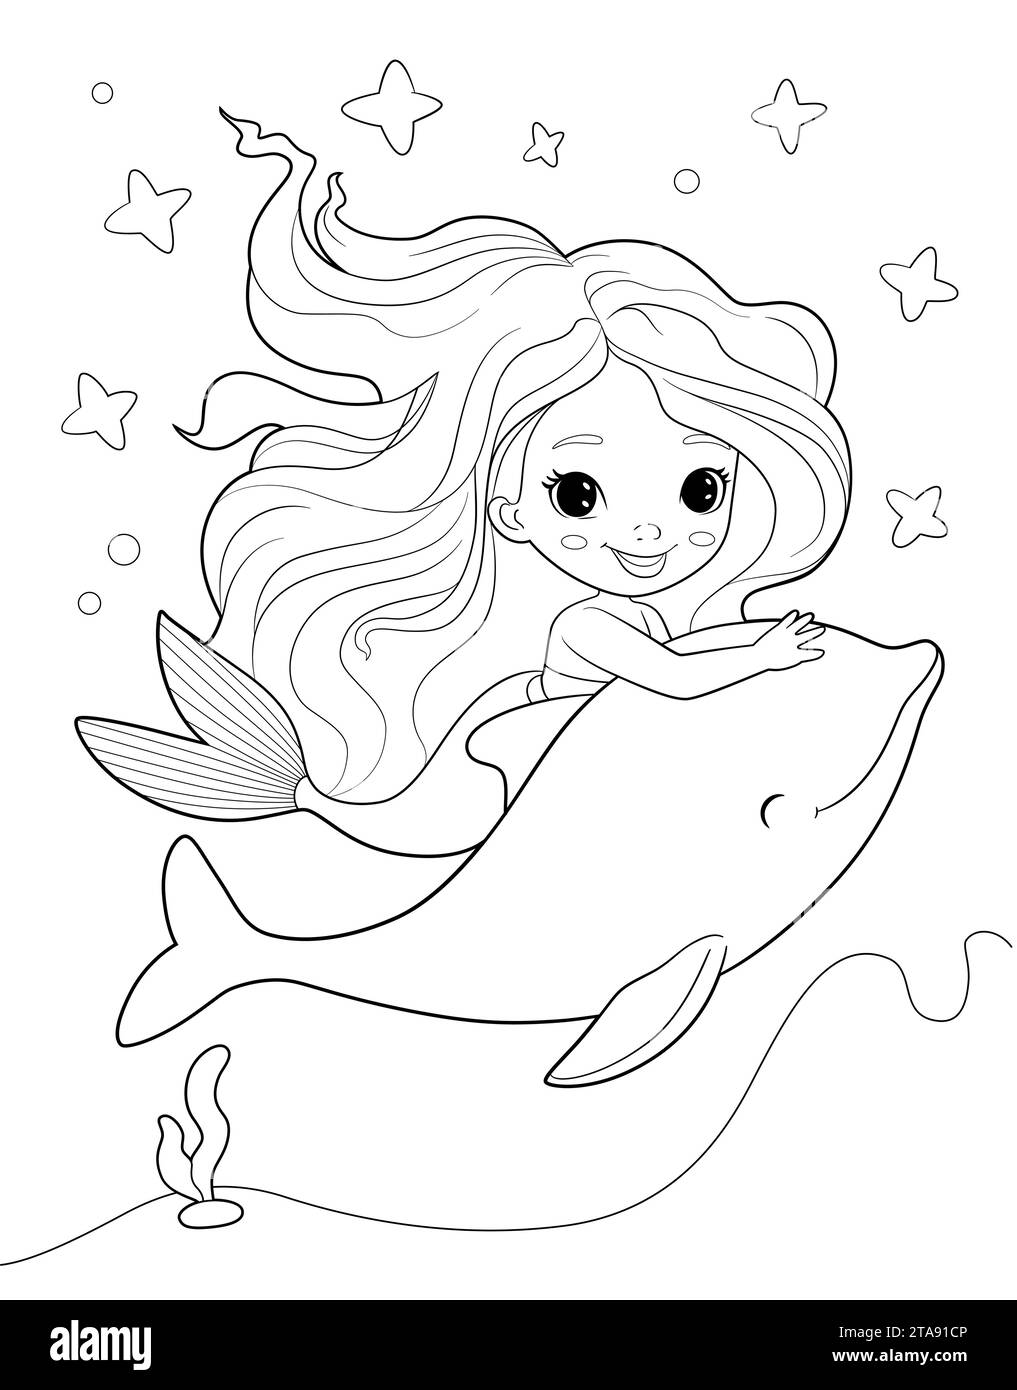 https://c8.alamy.com/comp/2TA91CP/cute-mermaid-girl-and-dolphin-outline-coloring-page-illustration-for-coloring-book-vector-outline-2TA91CP.jpg